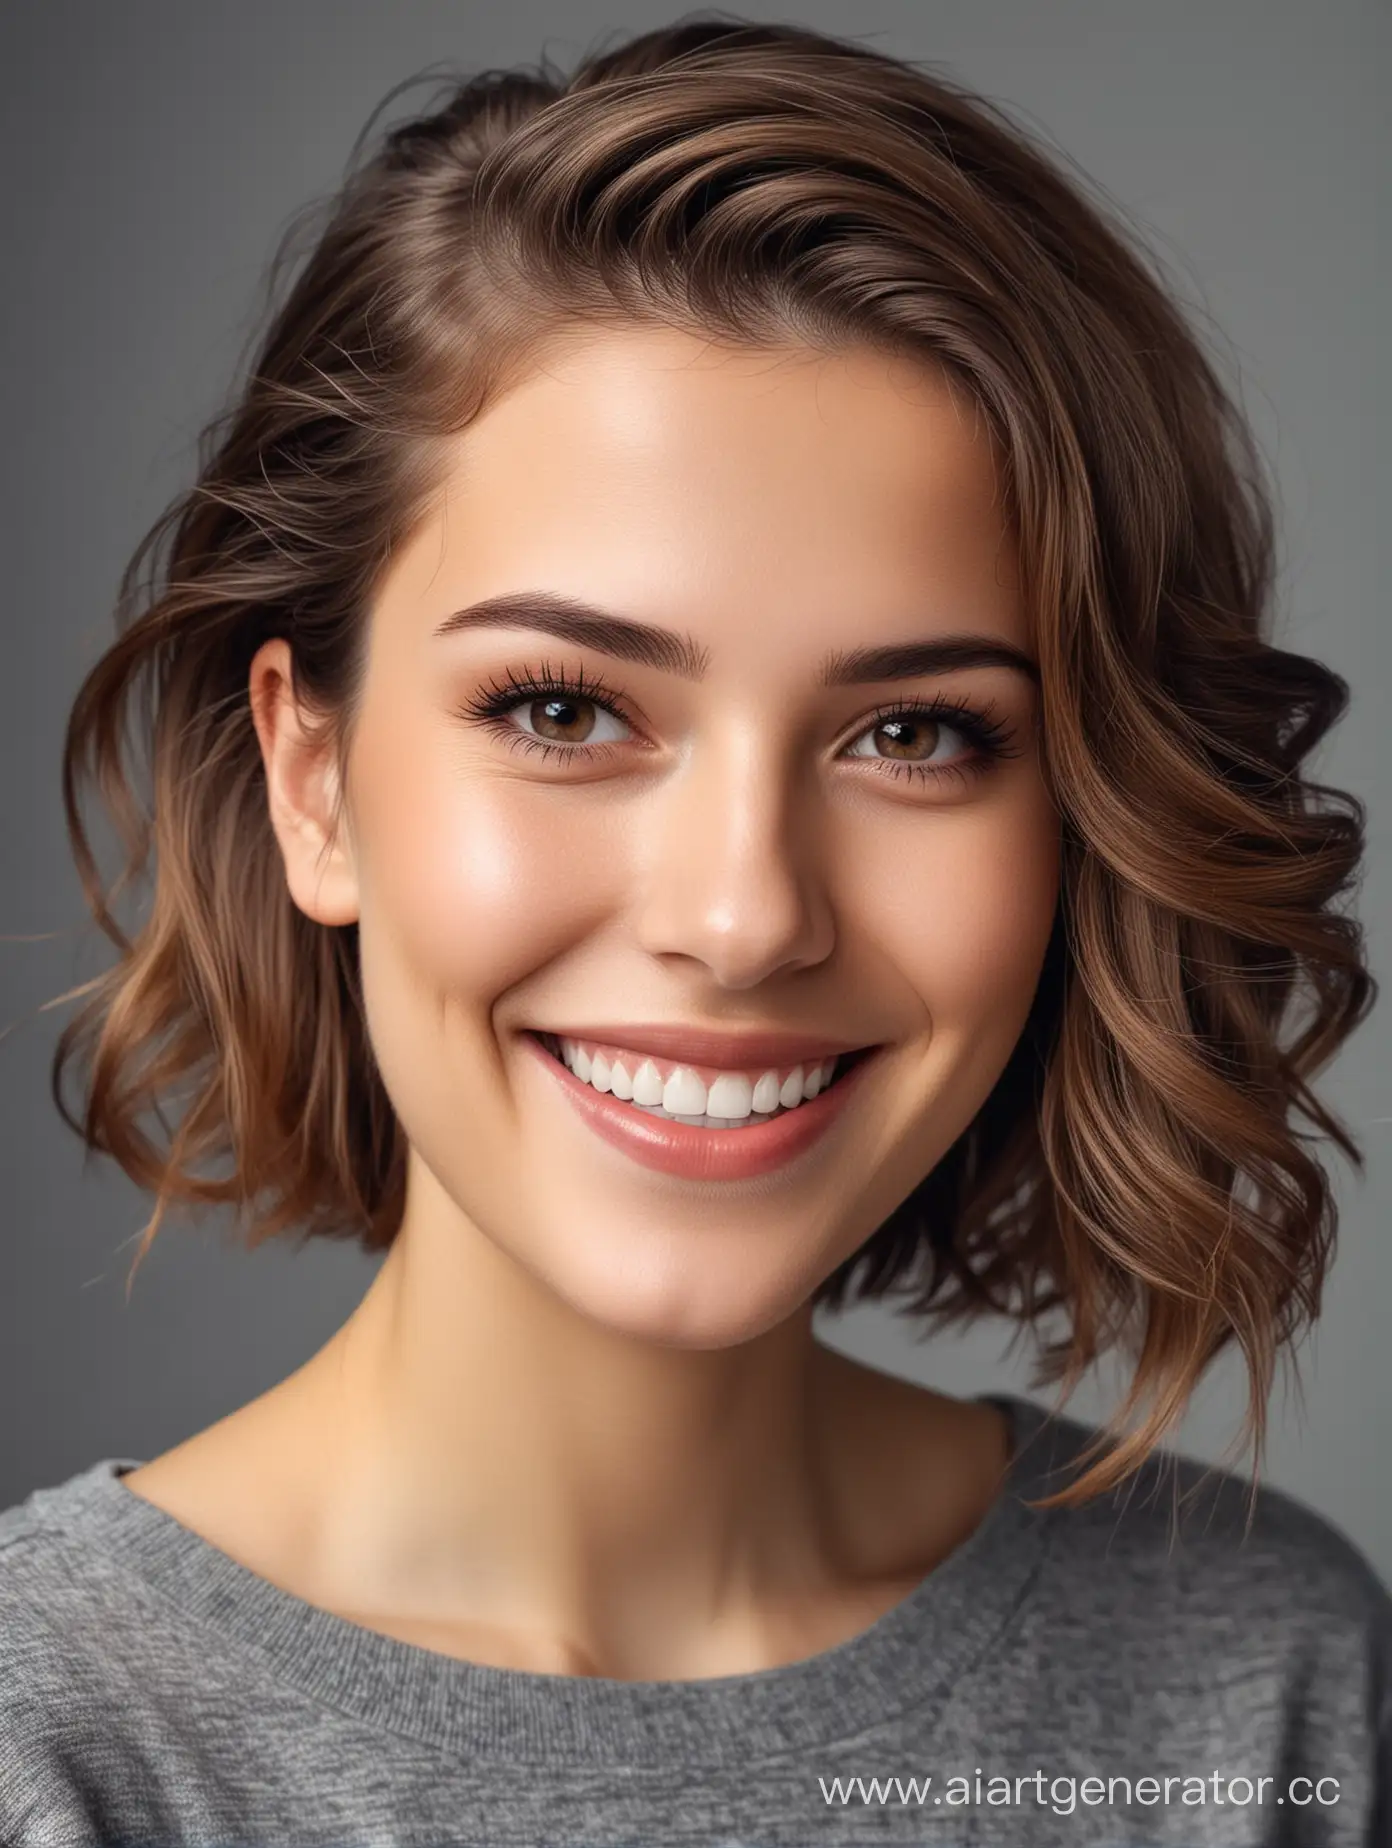 Smiling-Girl-with-Beautiful-Hairstyle-Portrait